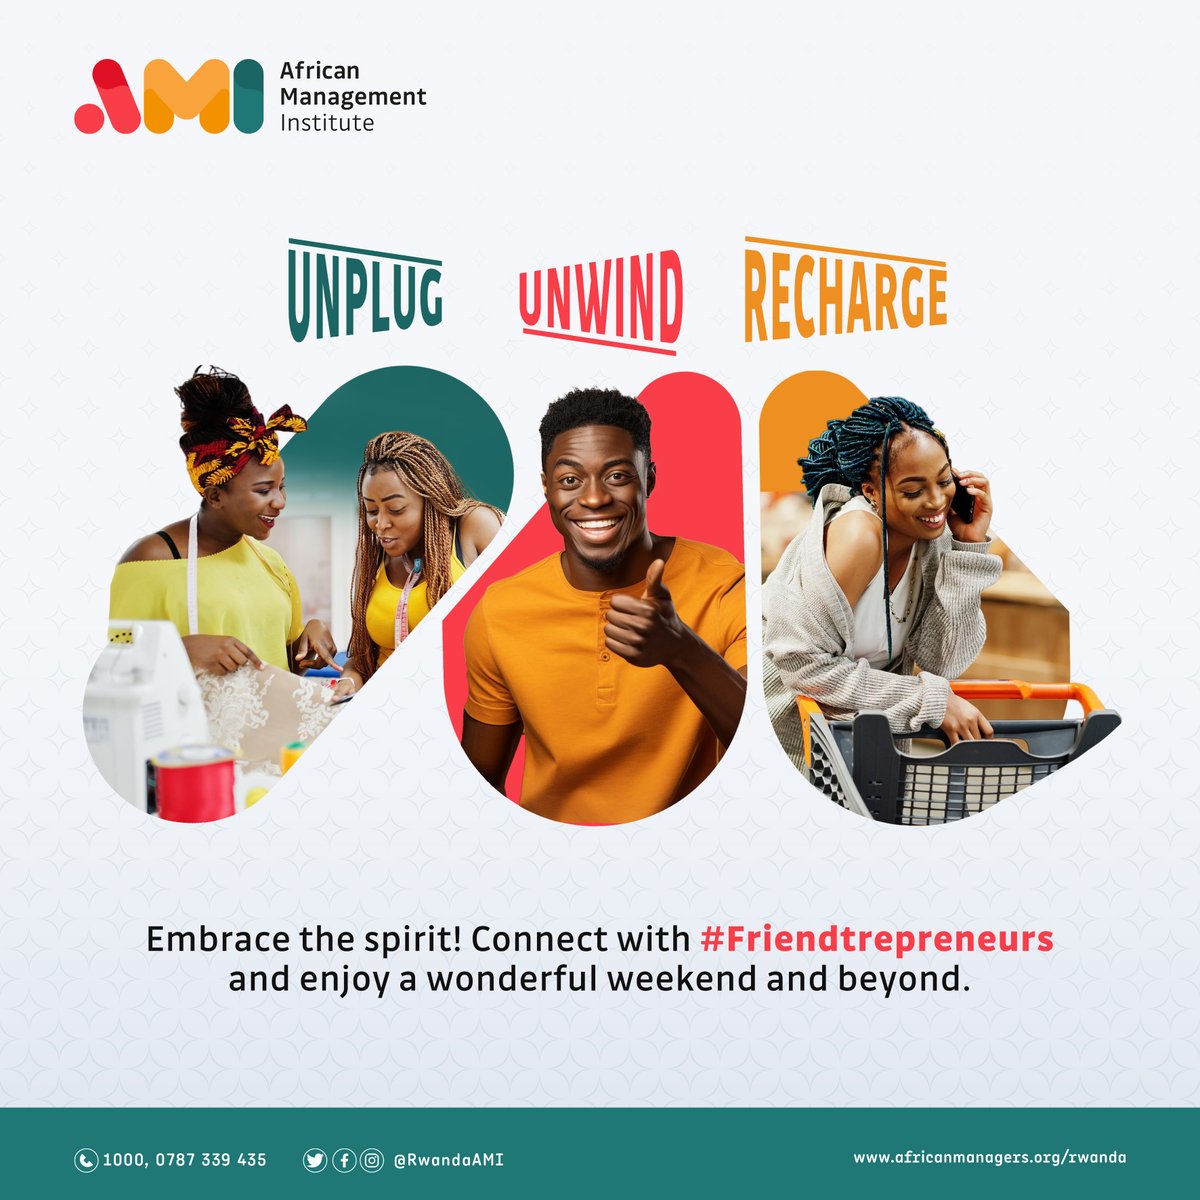 Disconnect, unwind, and recharge with your fellow #Friendtrepreneur. Elevate your weekend and beyond with a fresh perspective and renewed energy! #AMIRwanda #TGIF #Rwanda